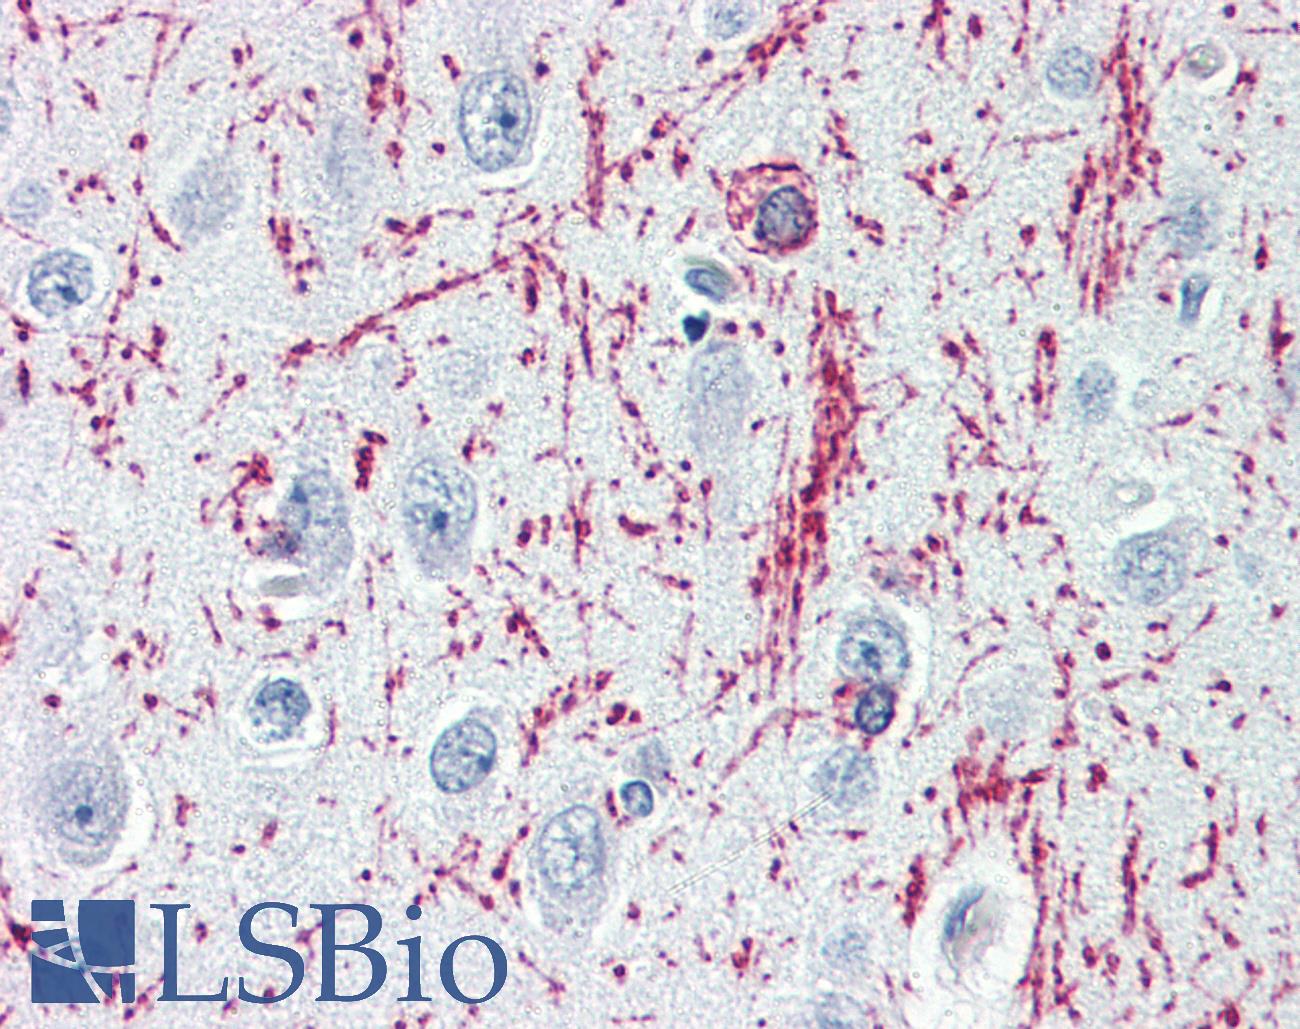 MBP / Myelin Basic Protein Antibody - Anti-Myelin Basic Protein antibody IHC of human brain, cortex. Immunohistochemistry of formalin-fixed, paraffin-embedded tissue after heat-induced antigen retrieval. Antibody dilution 1:100.